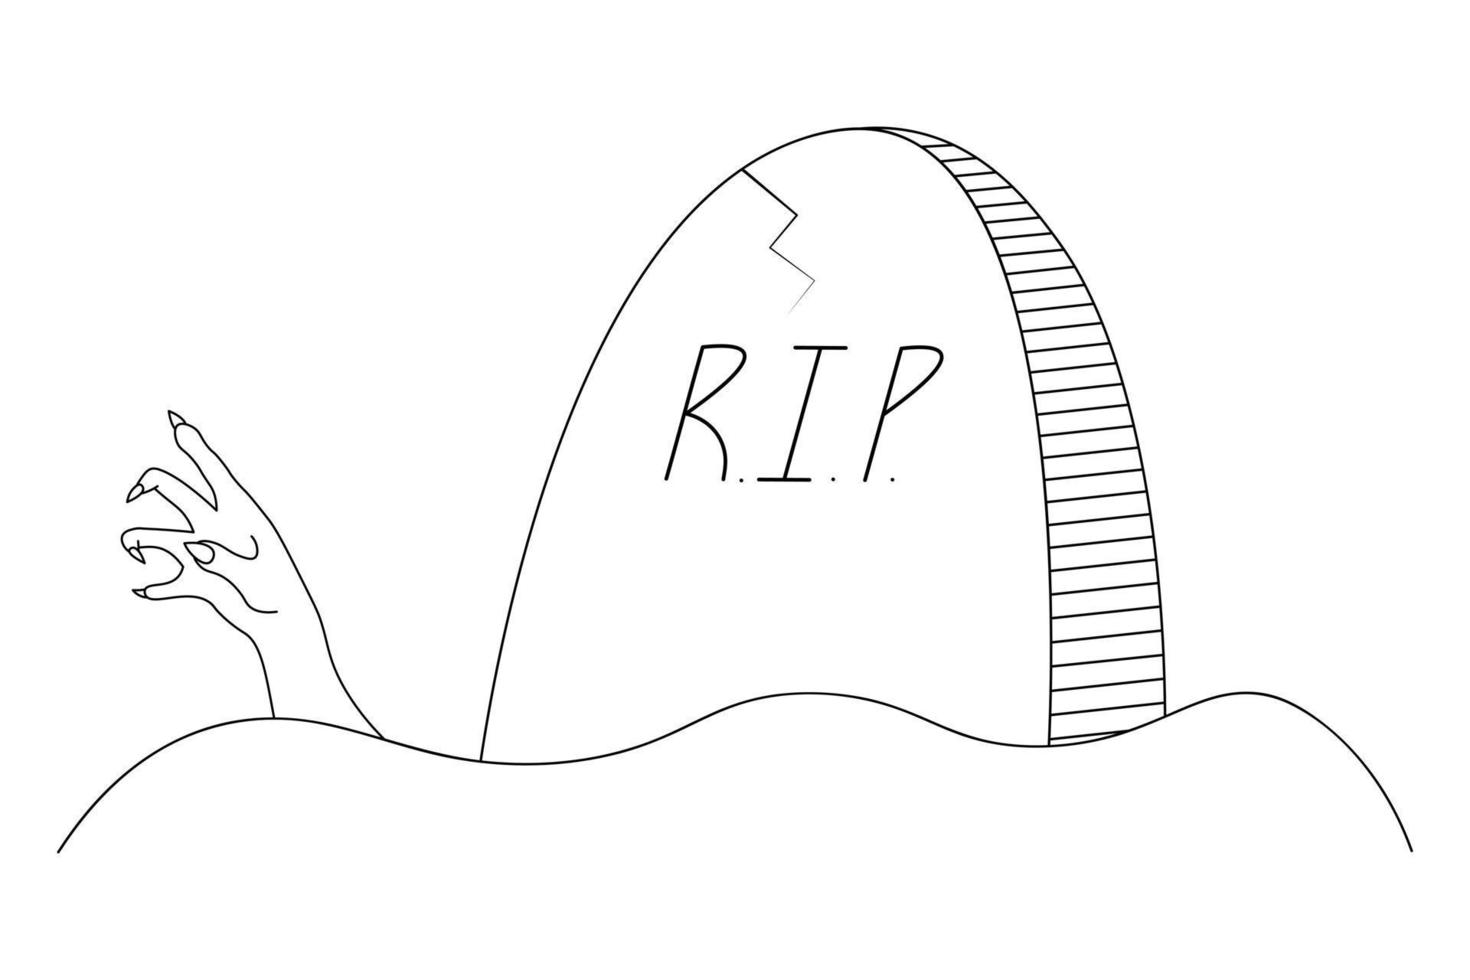 The dead man's hand reaches out from under the gravestone. Inscription - Rest in Peace. Gnarled fingers with sharp nails. Sketch. Vector illustration. Outline on an isolated white background.